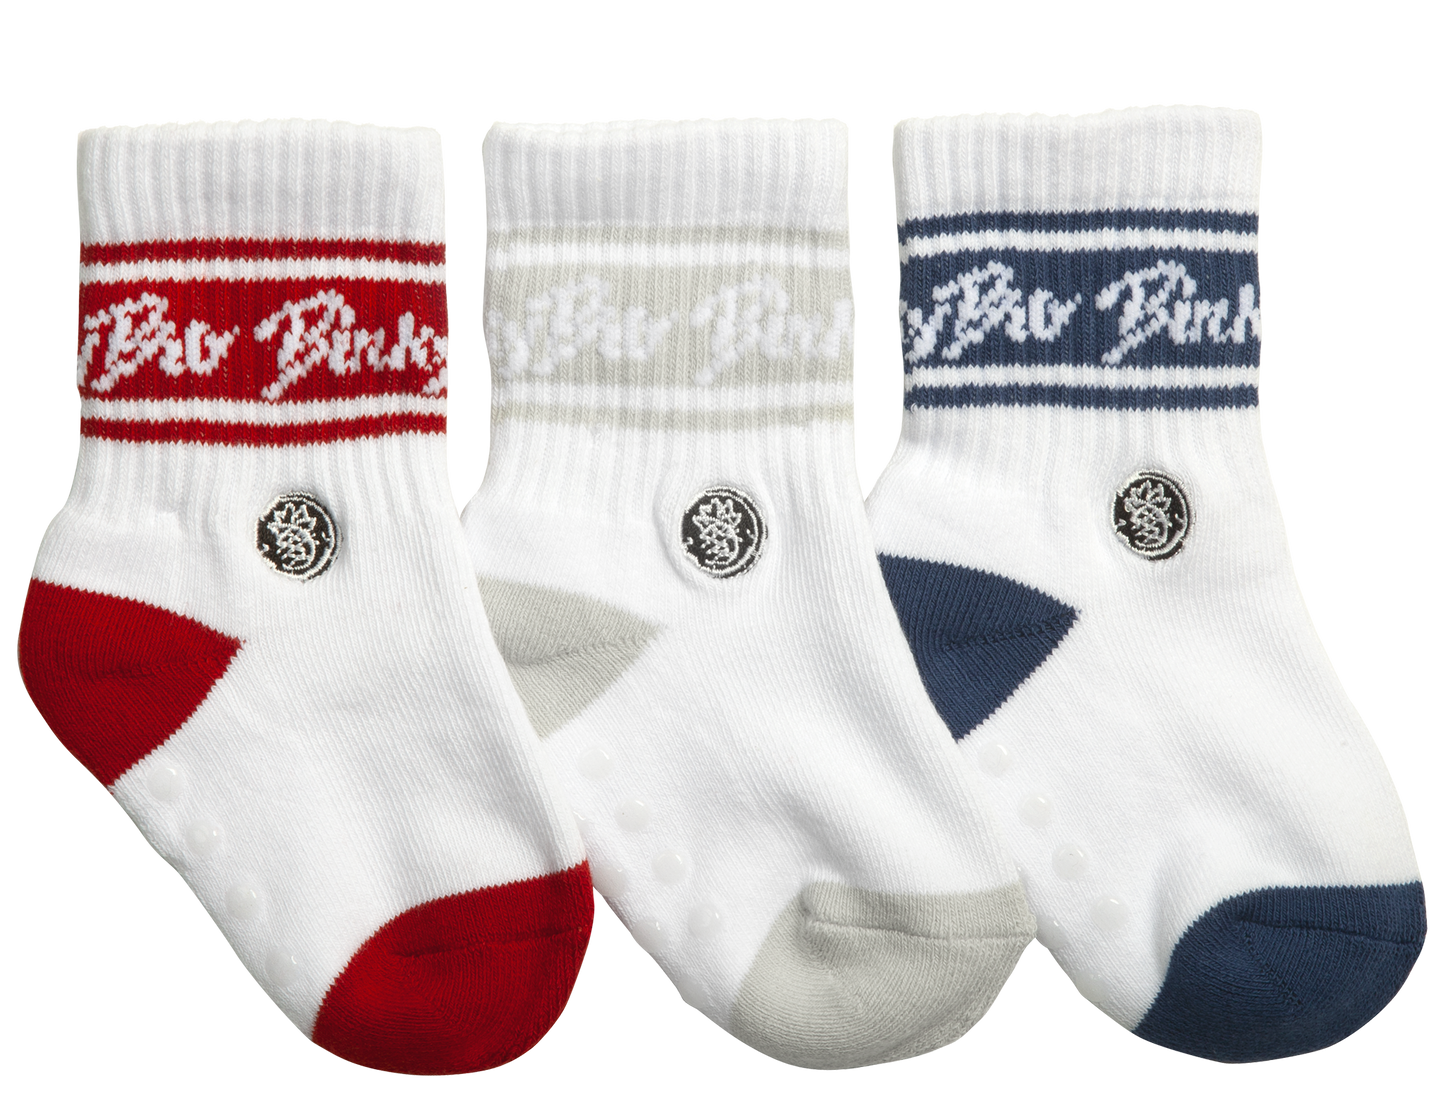 3-Pack Red/White/Blue socks: Toddler (12 months - 3 years)